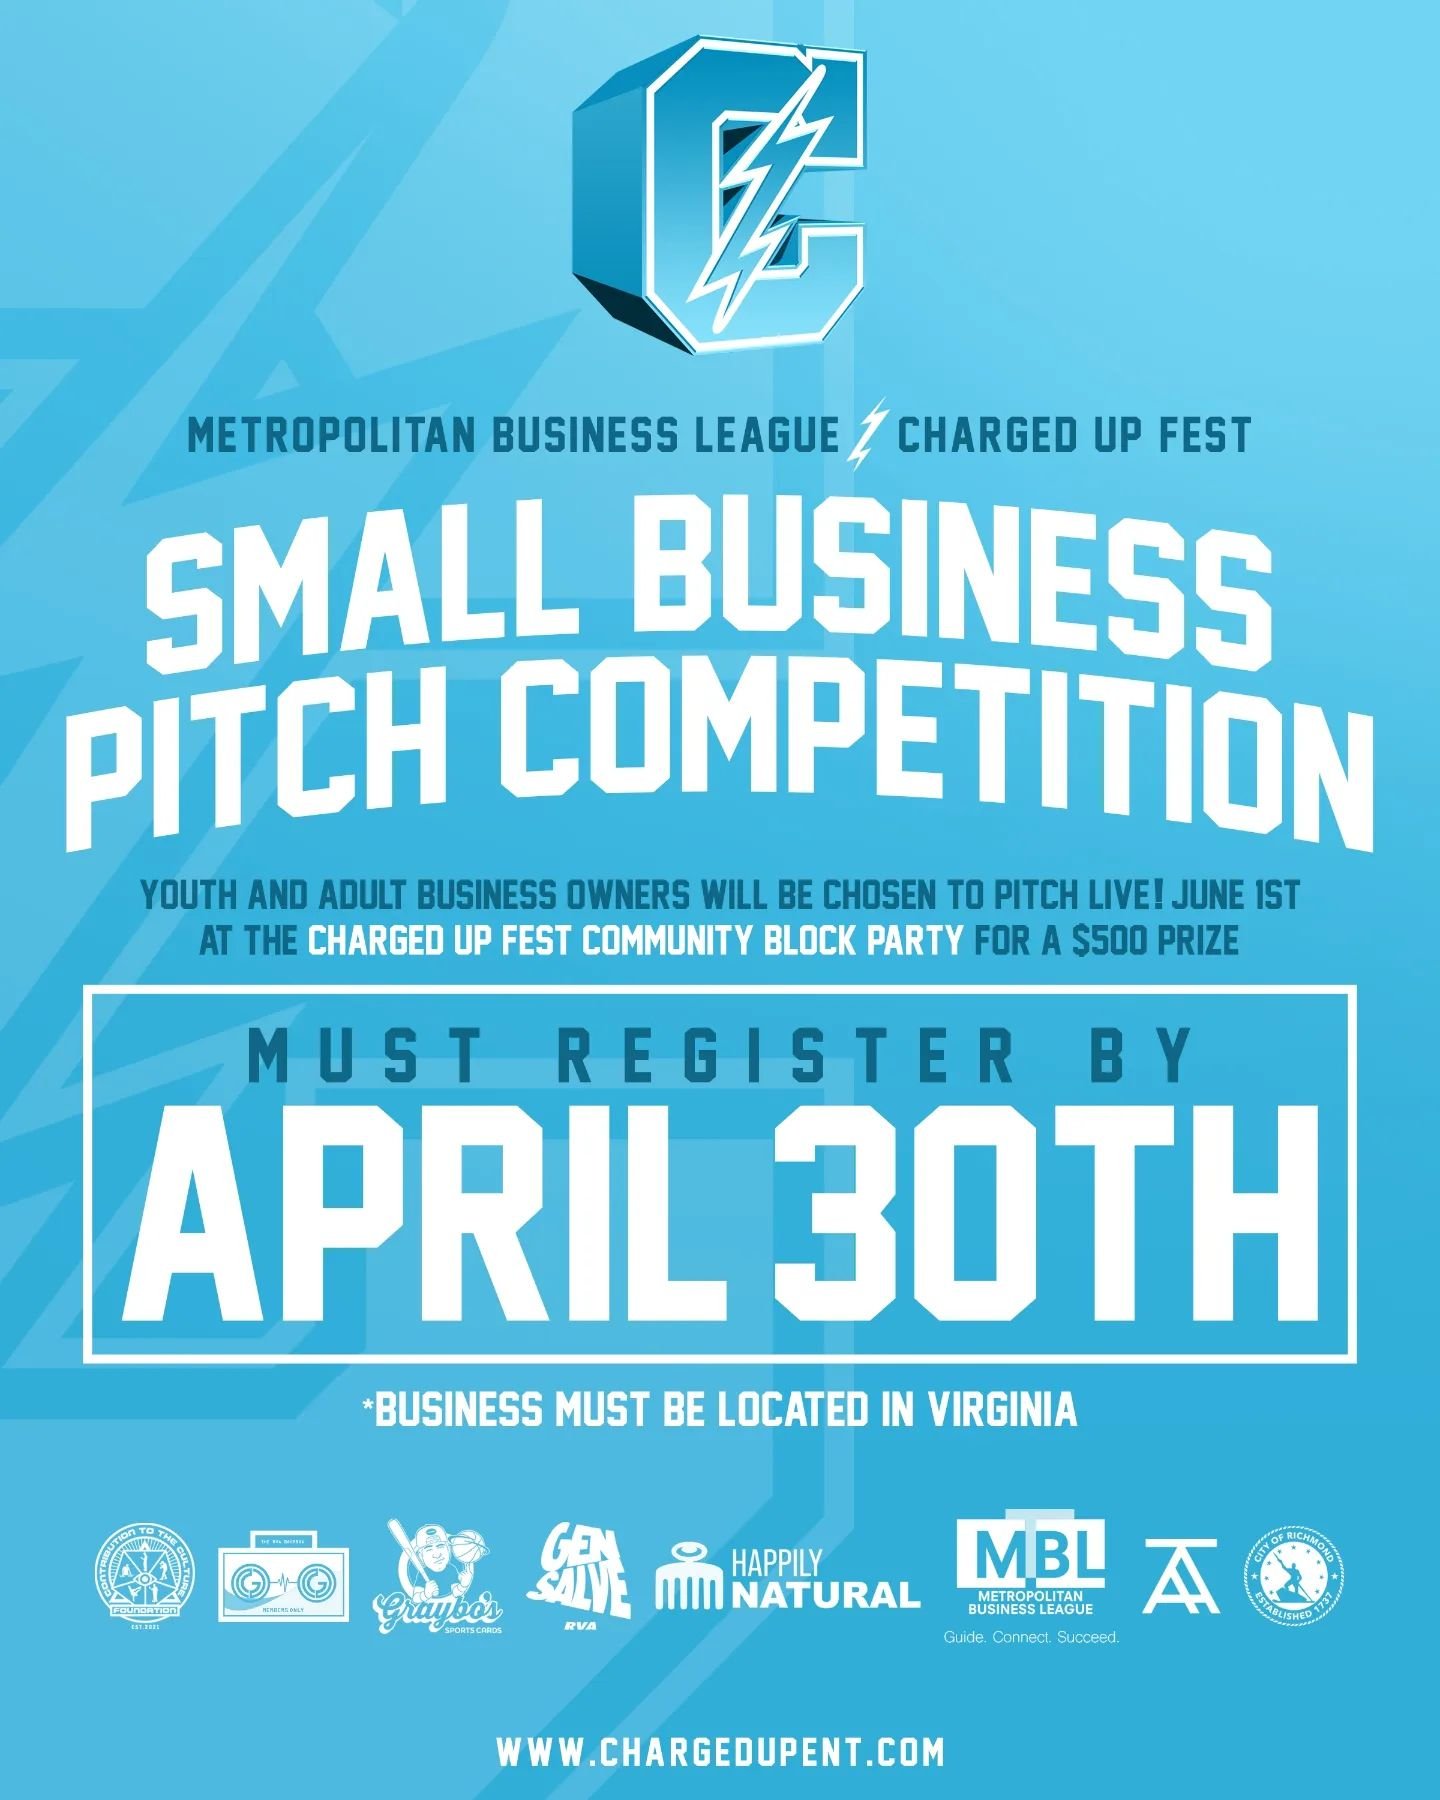 We are partnering with the Metropolitan Business League to host a small business pitch competition at our Charged Up Fest block party. 

10 small business owners will compete live for a chance to win a $500 grant

Registration is free and open to mid